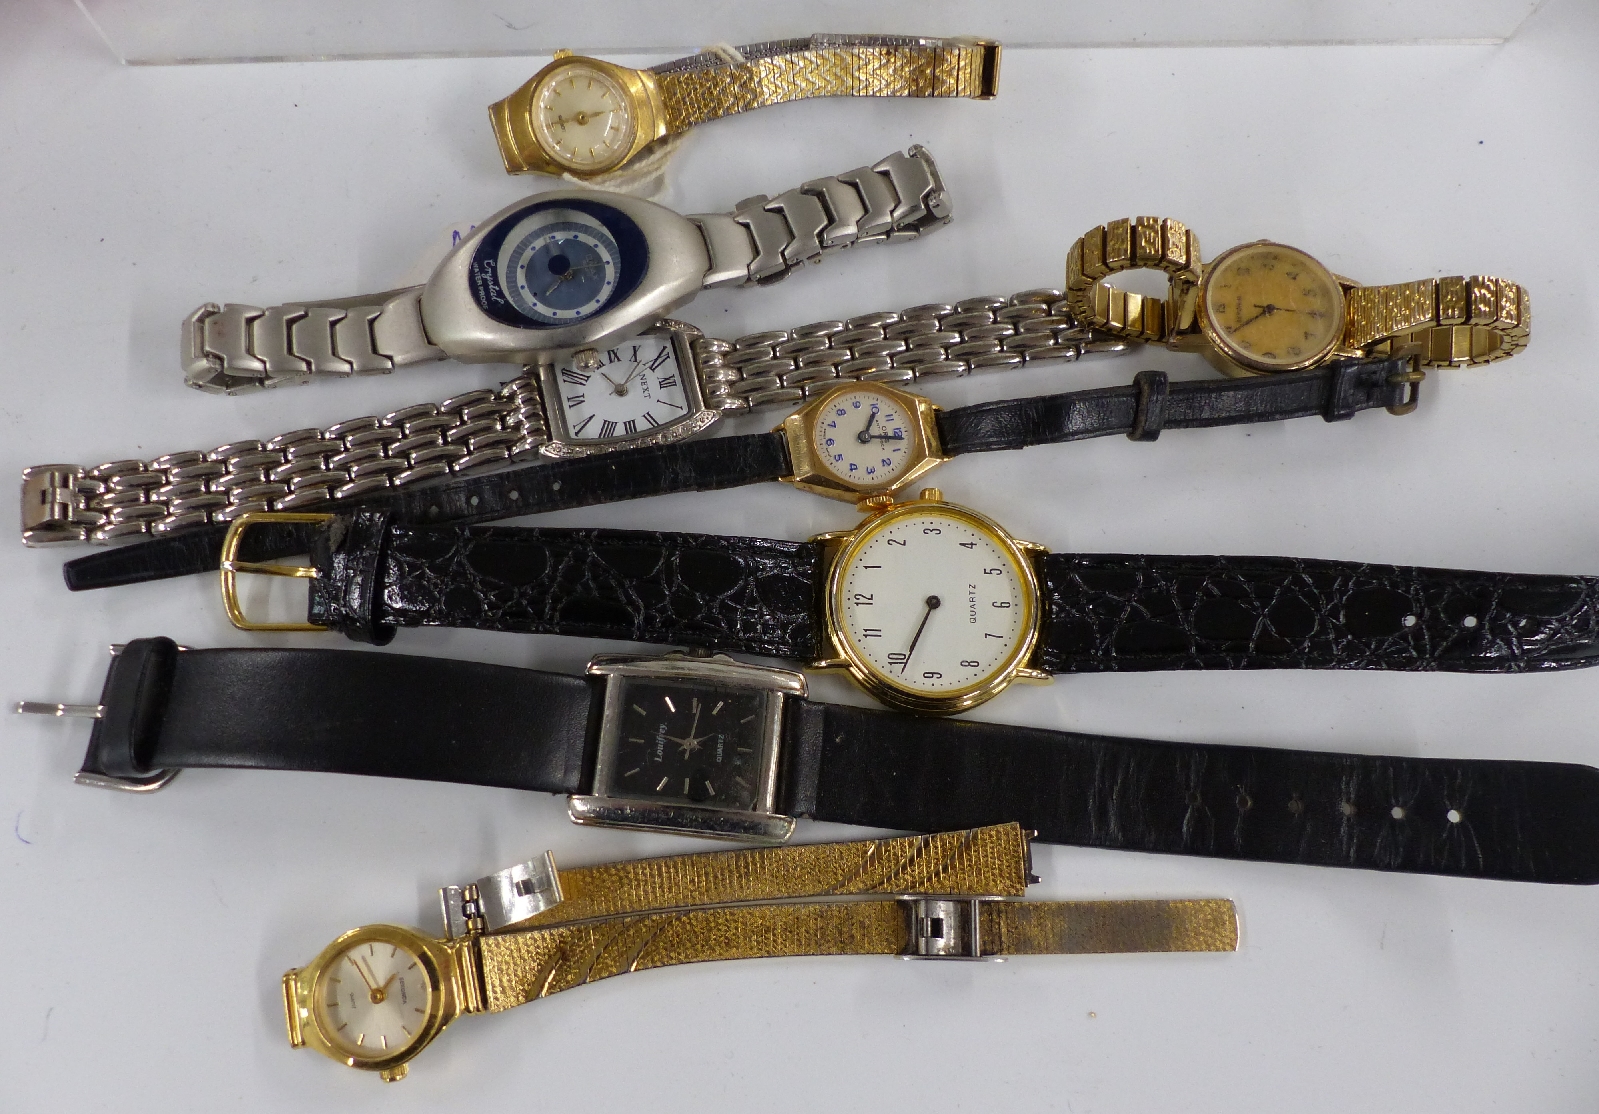 A collection of costume jewellery and watches including brooches and beads - Image 2 of 3